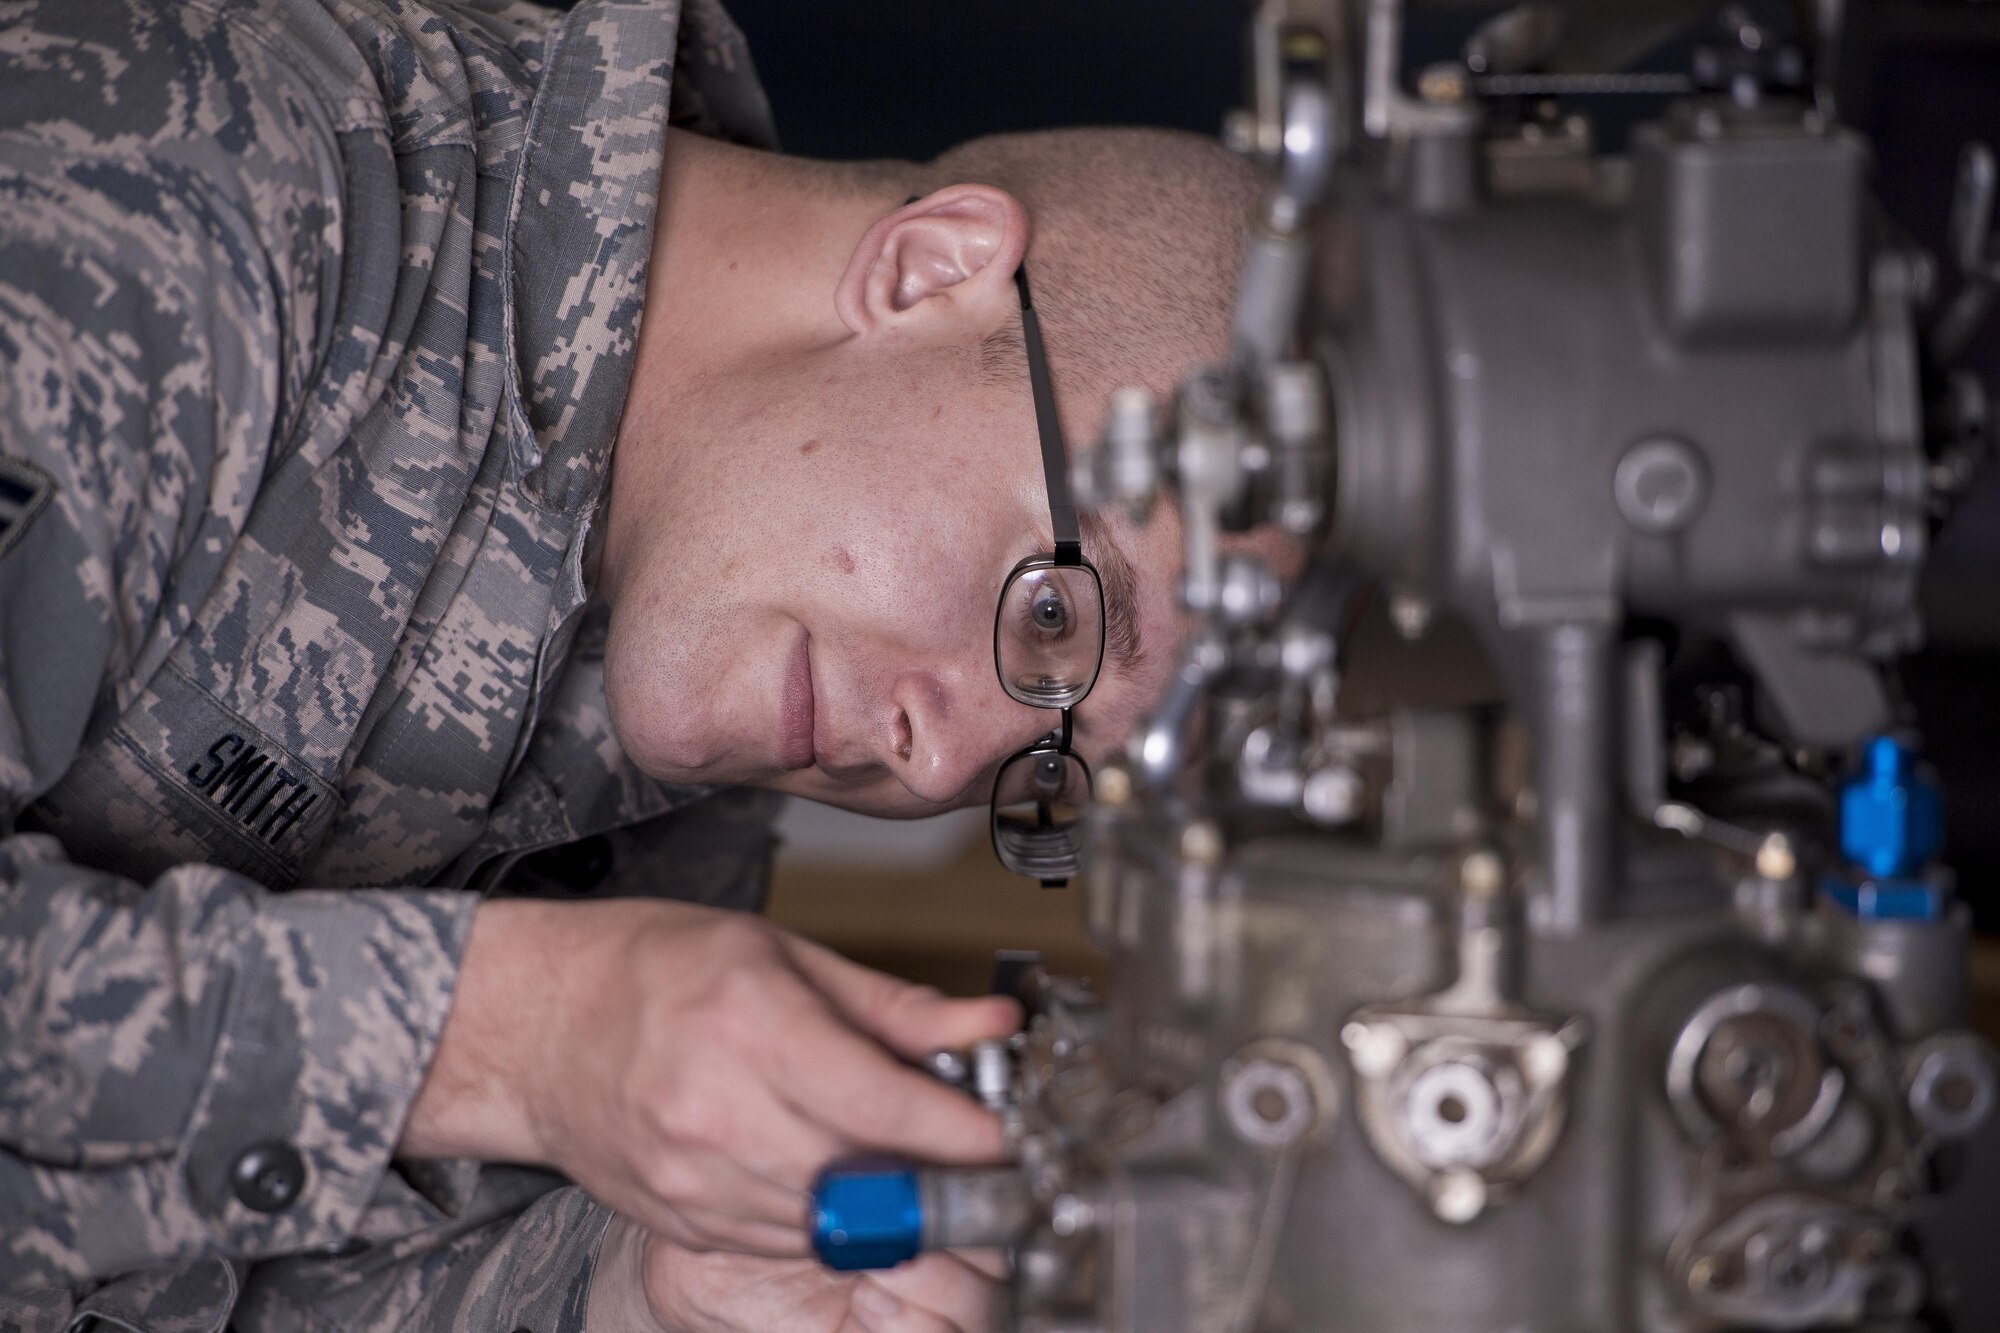 Airman 1st Class Jacob Smith, 374th Maintenance Squadron propulsion apprentice, practices on a C-130H Hercules training component, May 16, 2017, at Yokota Air Base, Japan. Smith is in the Organizational Maintenance and Troubleshooting course taught by instructors with the 373rd Training Squadron Detachment 15. (U.S. Air Force photo by Airman 1st Class Donald Hudson)